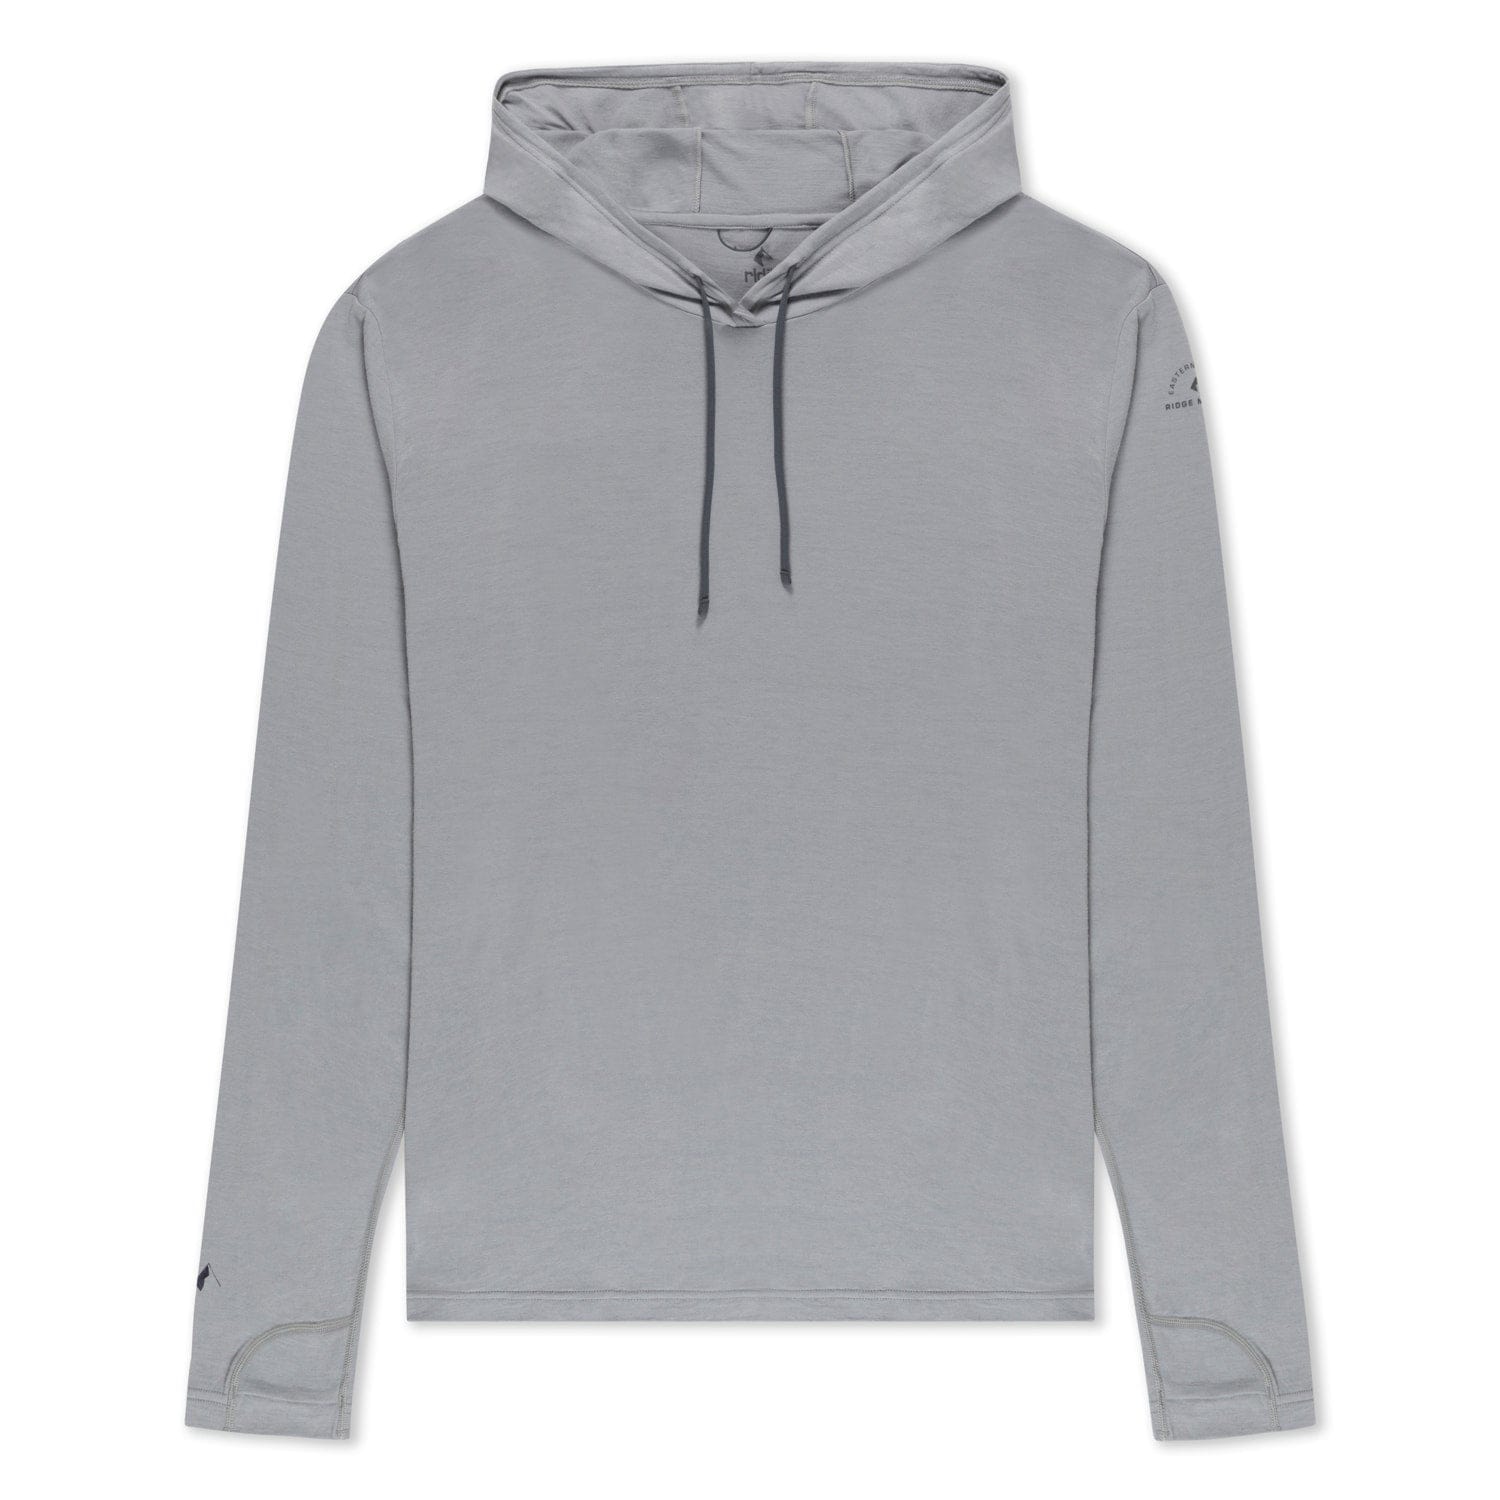 Don't Drip: Pullover Hooded Sweatshirt - Comfy Fit & Style Hoodie